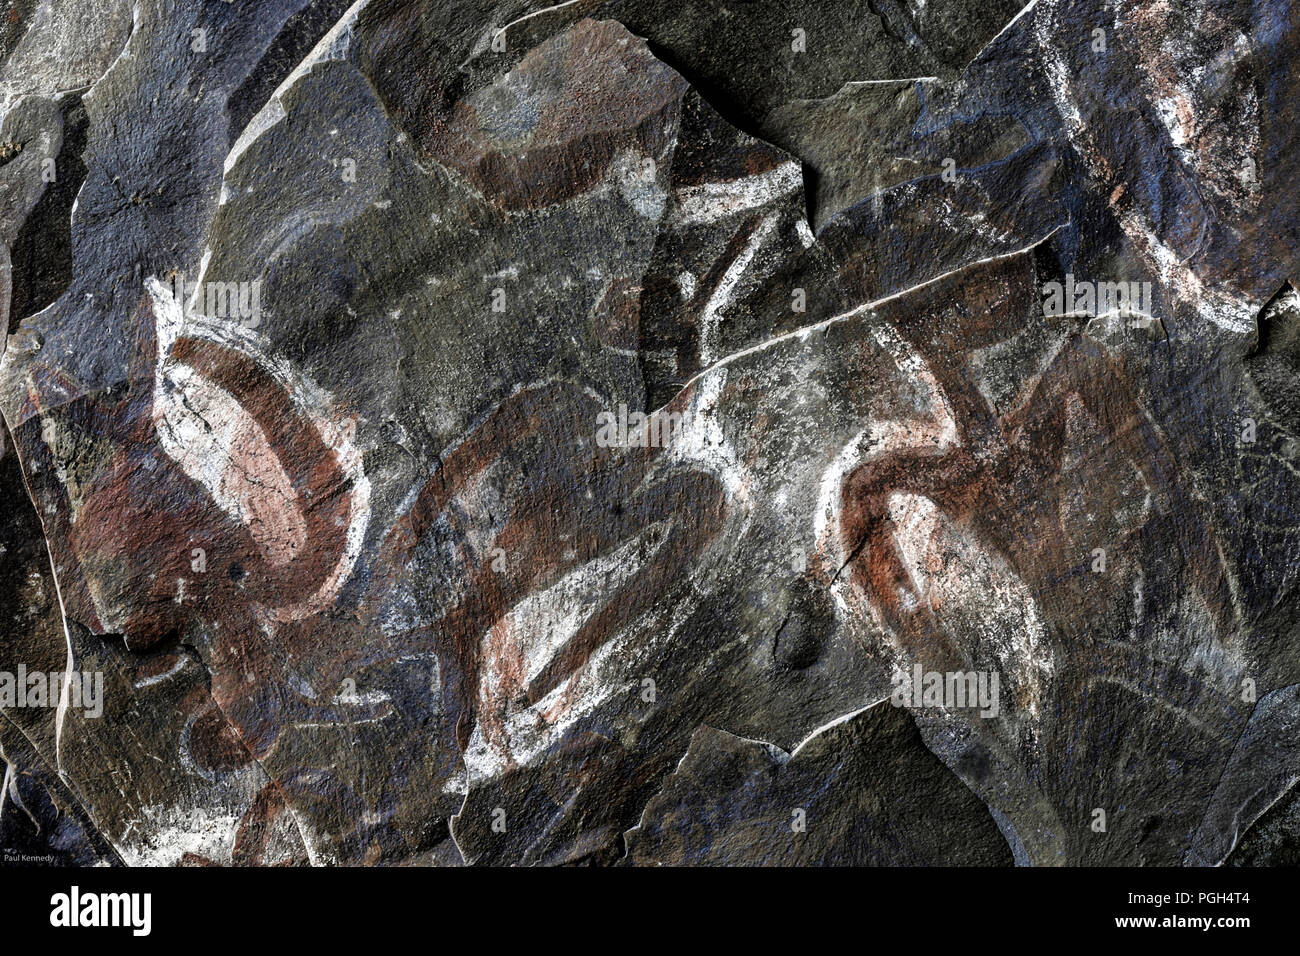 Ancient paintings on the ceiling of Ana Kai Tangata cave in Easter Island (Rapa Nui) Stock Photo